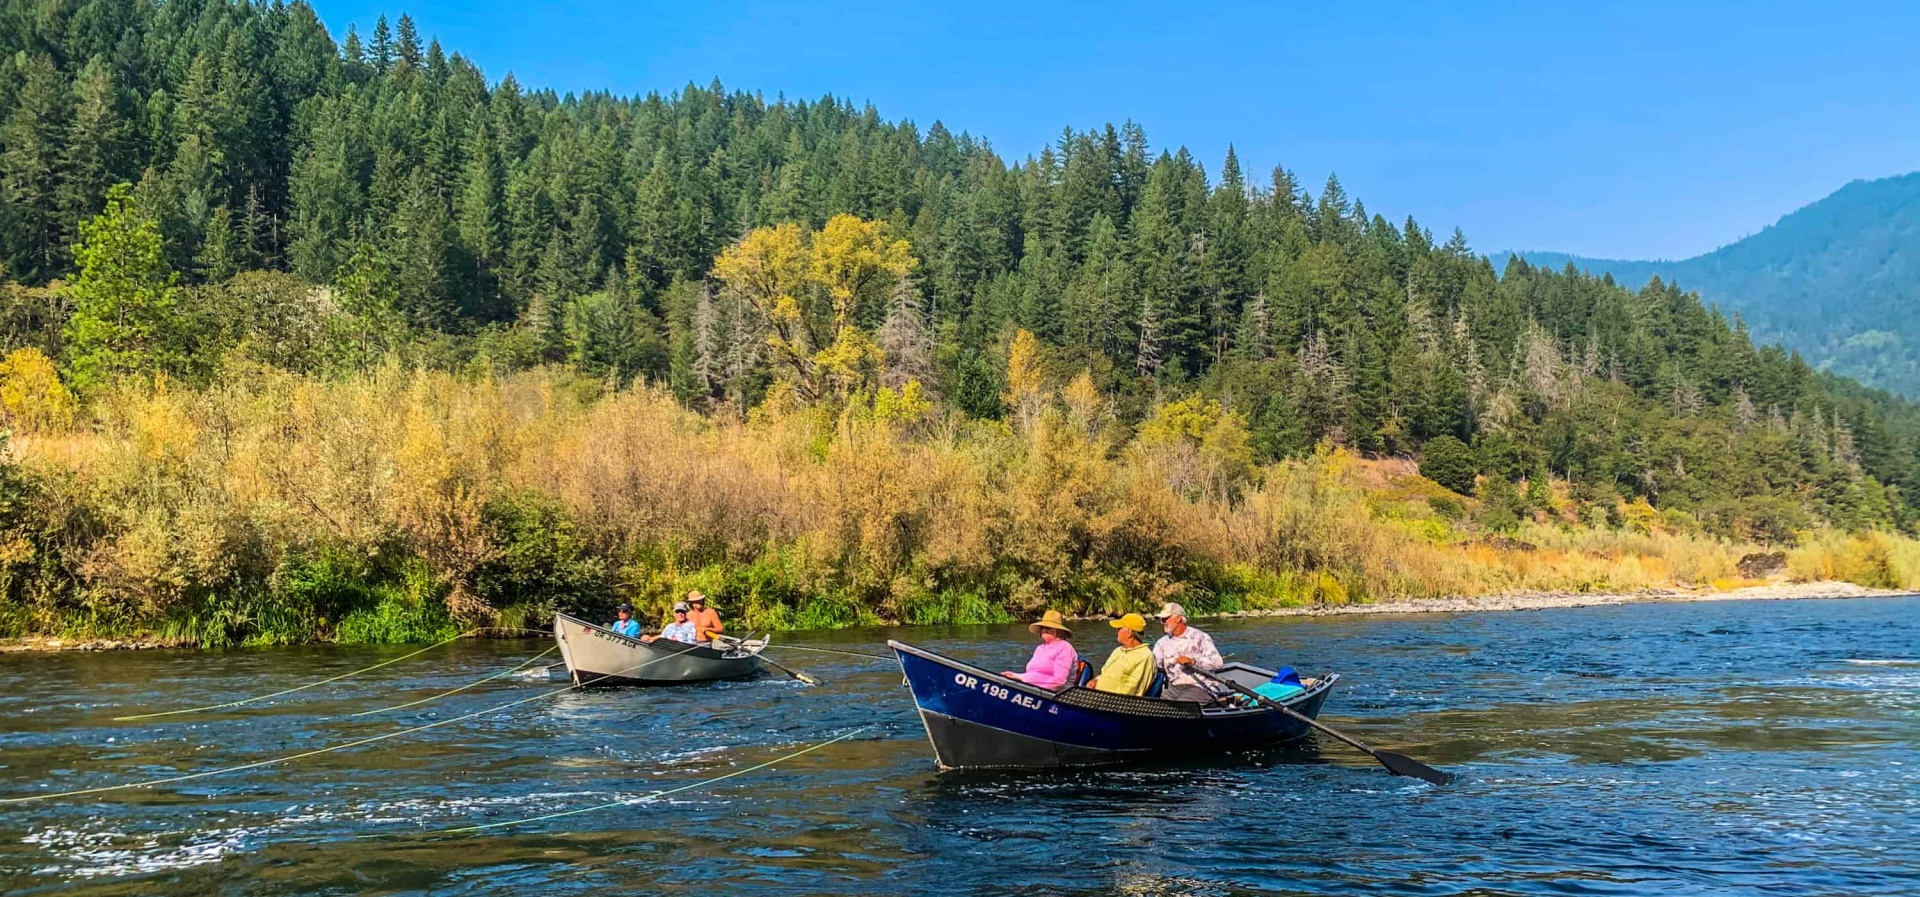 Fly fishing on the Rogue River